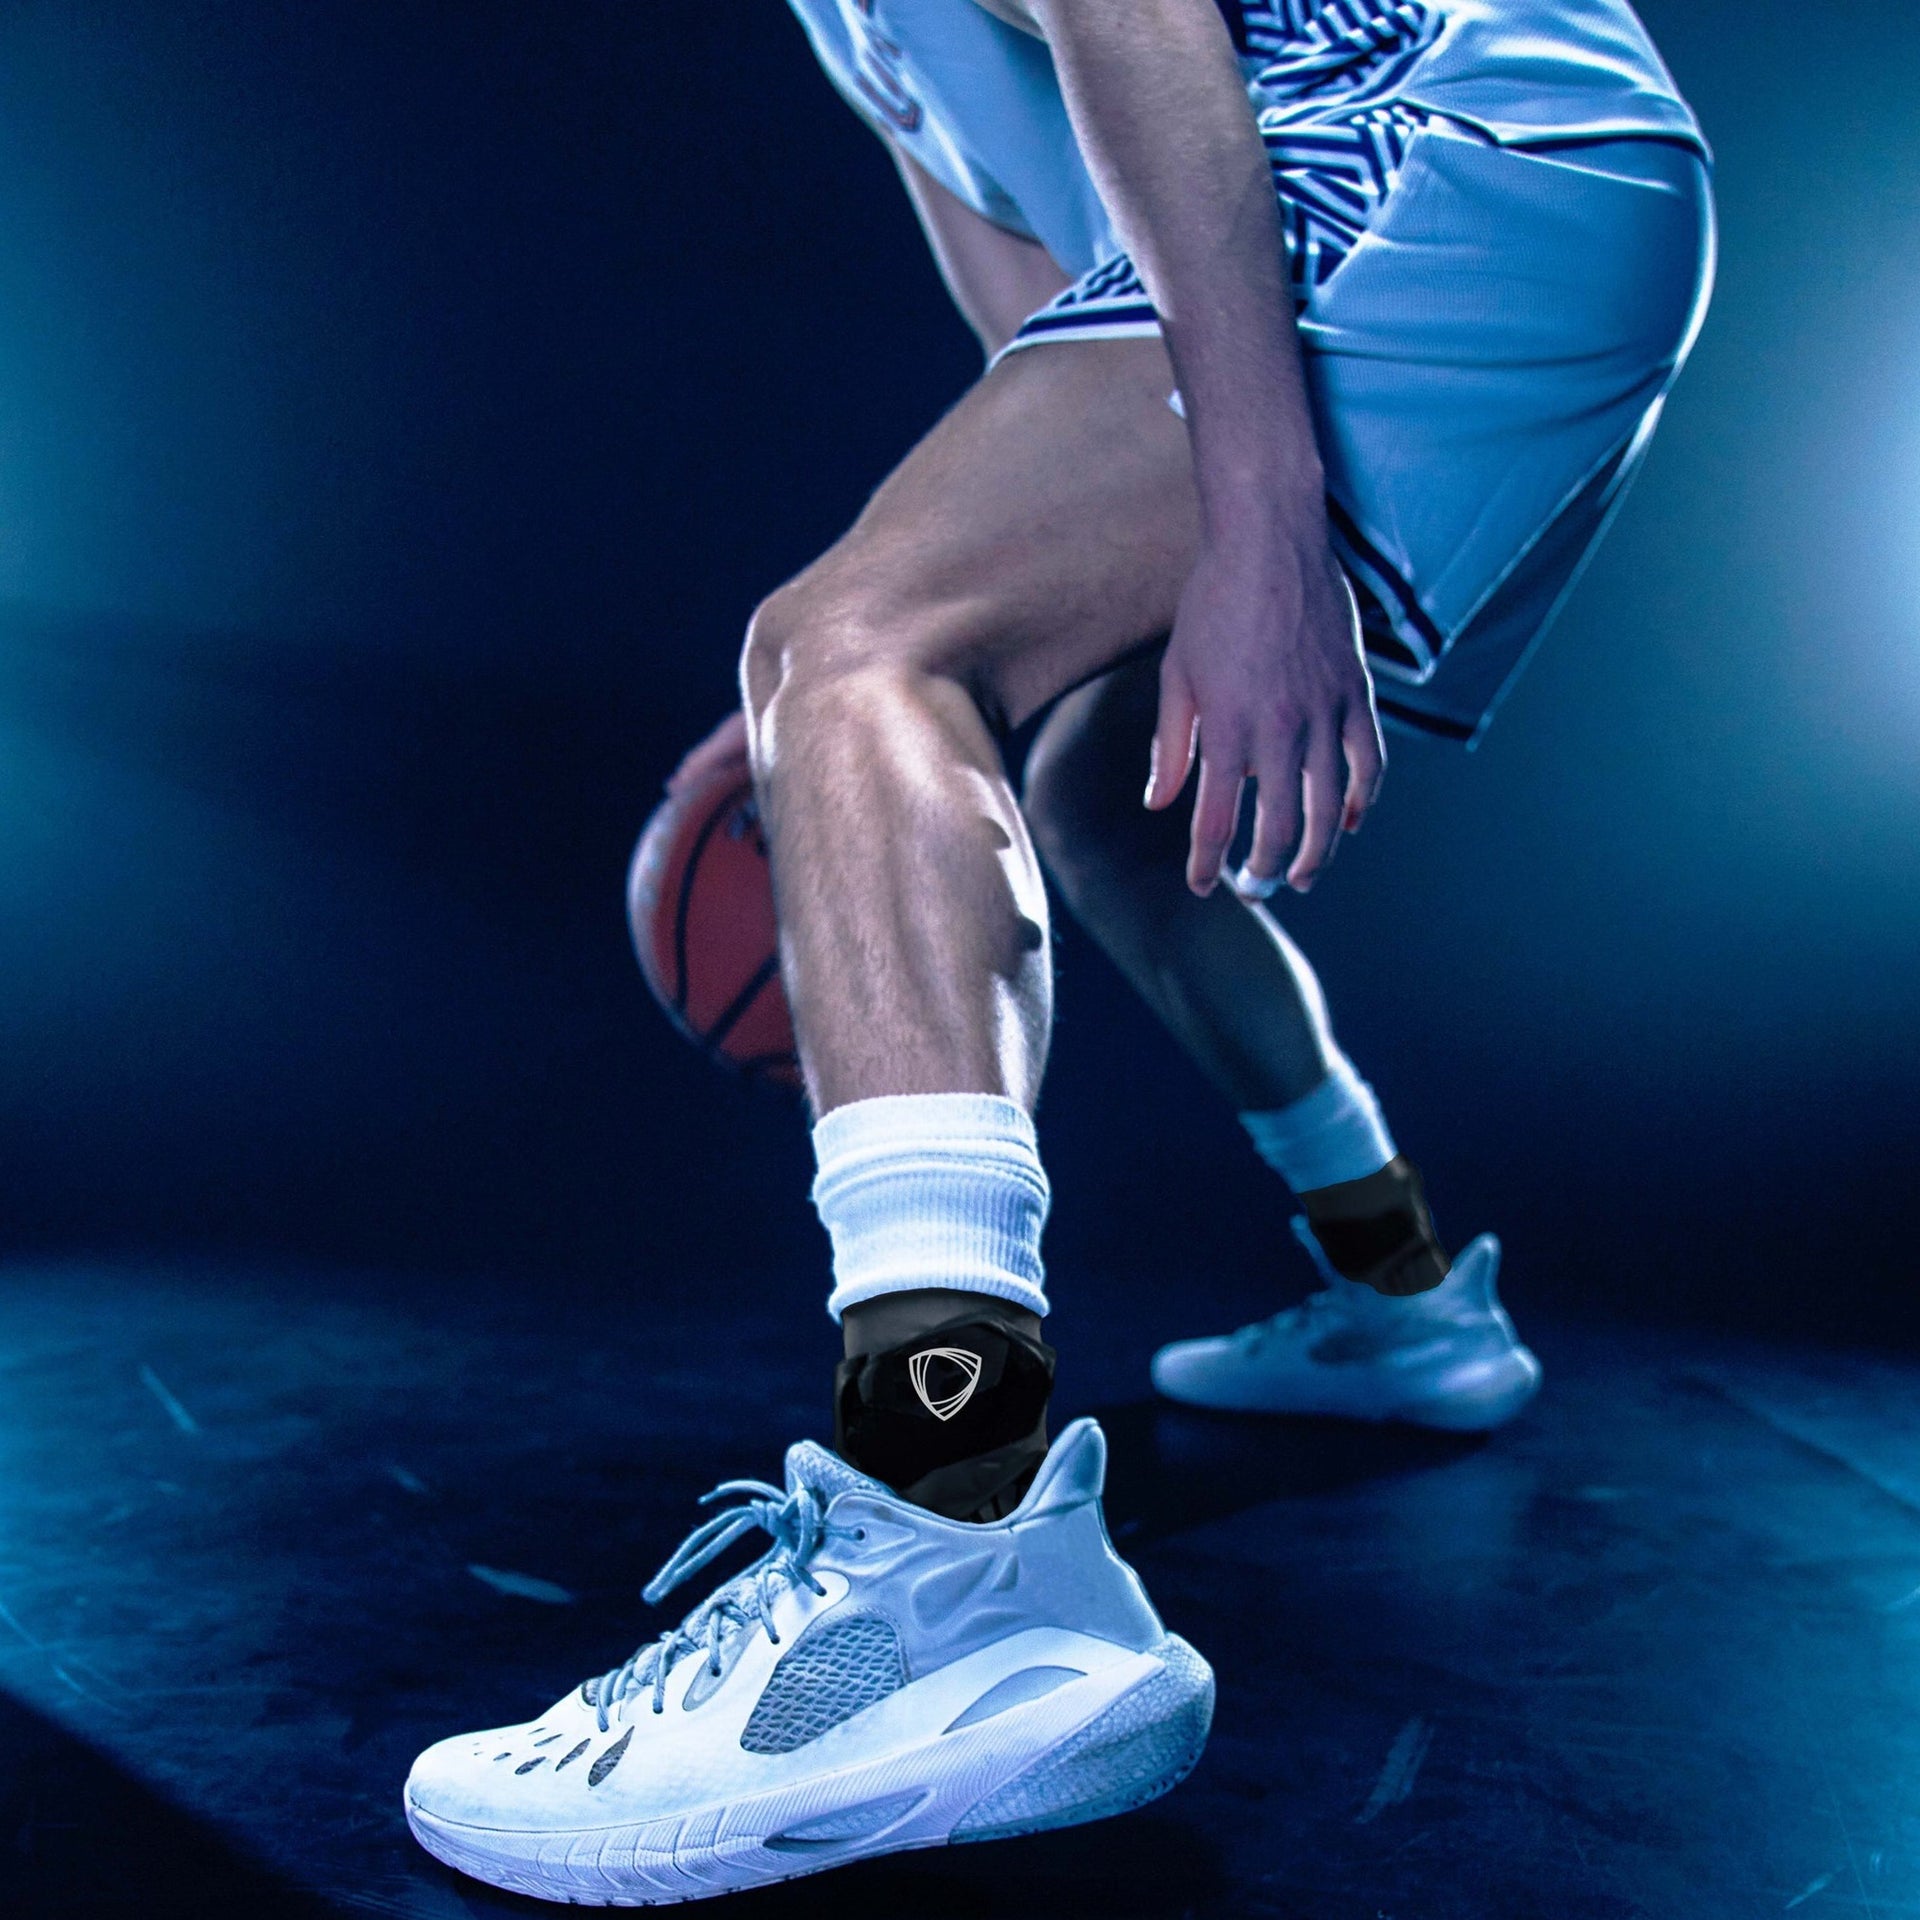 Protecting Performance: The BetterGuard ankle brace